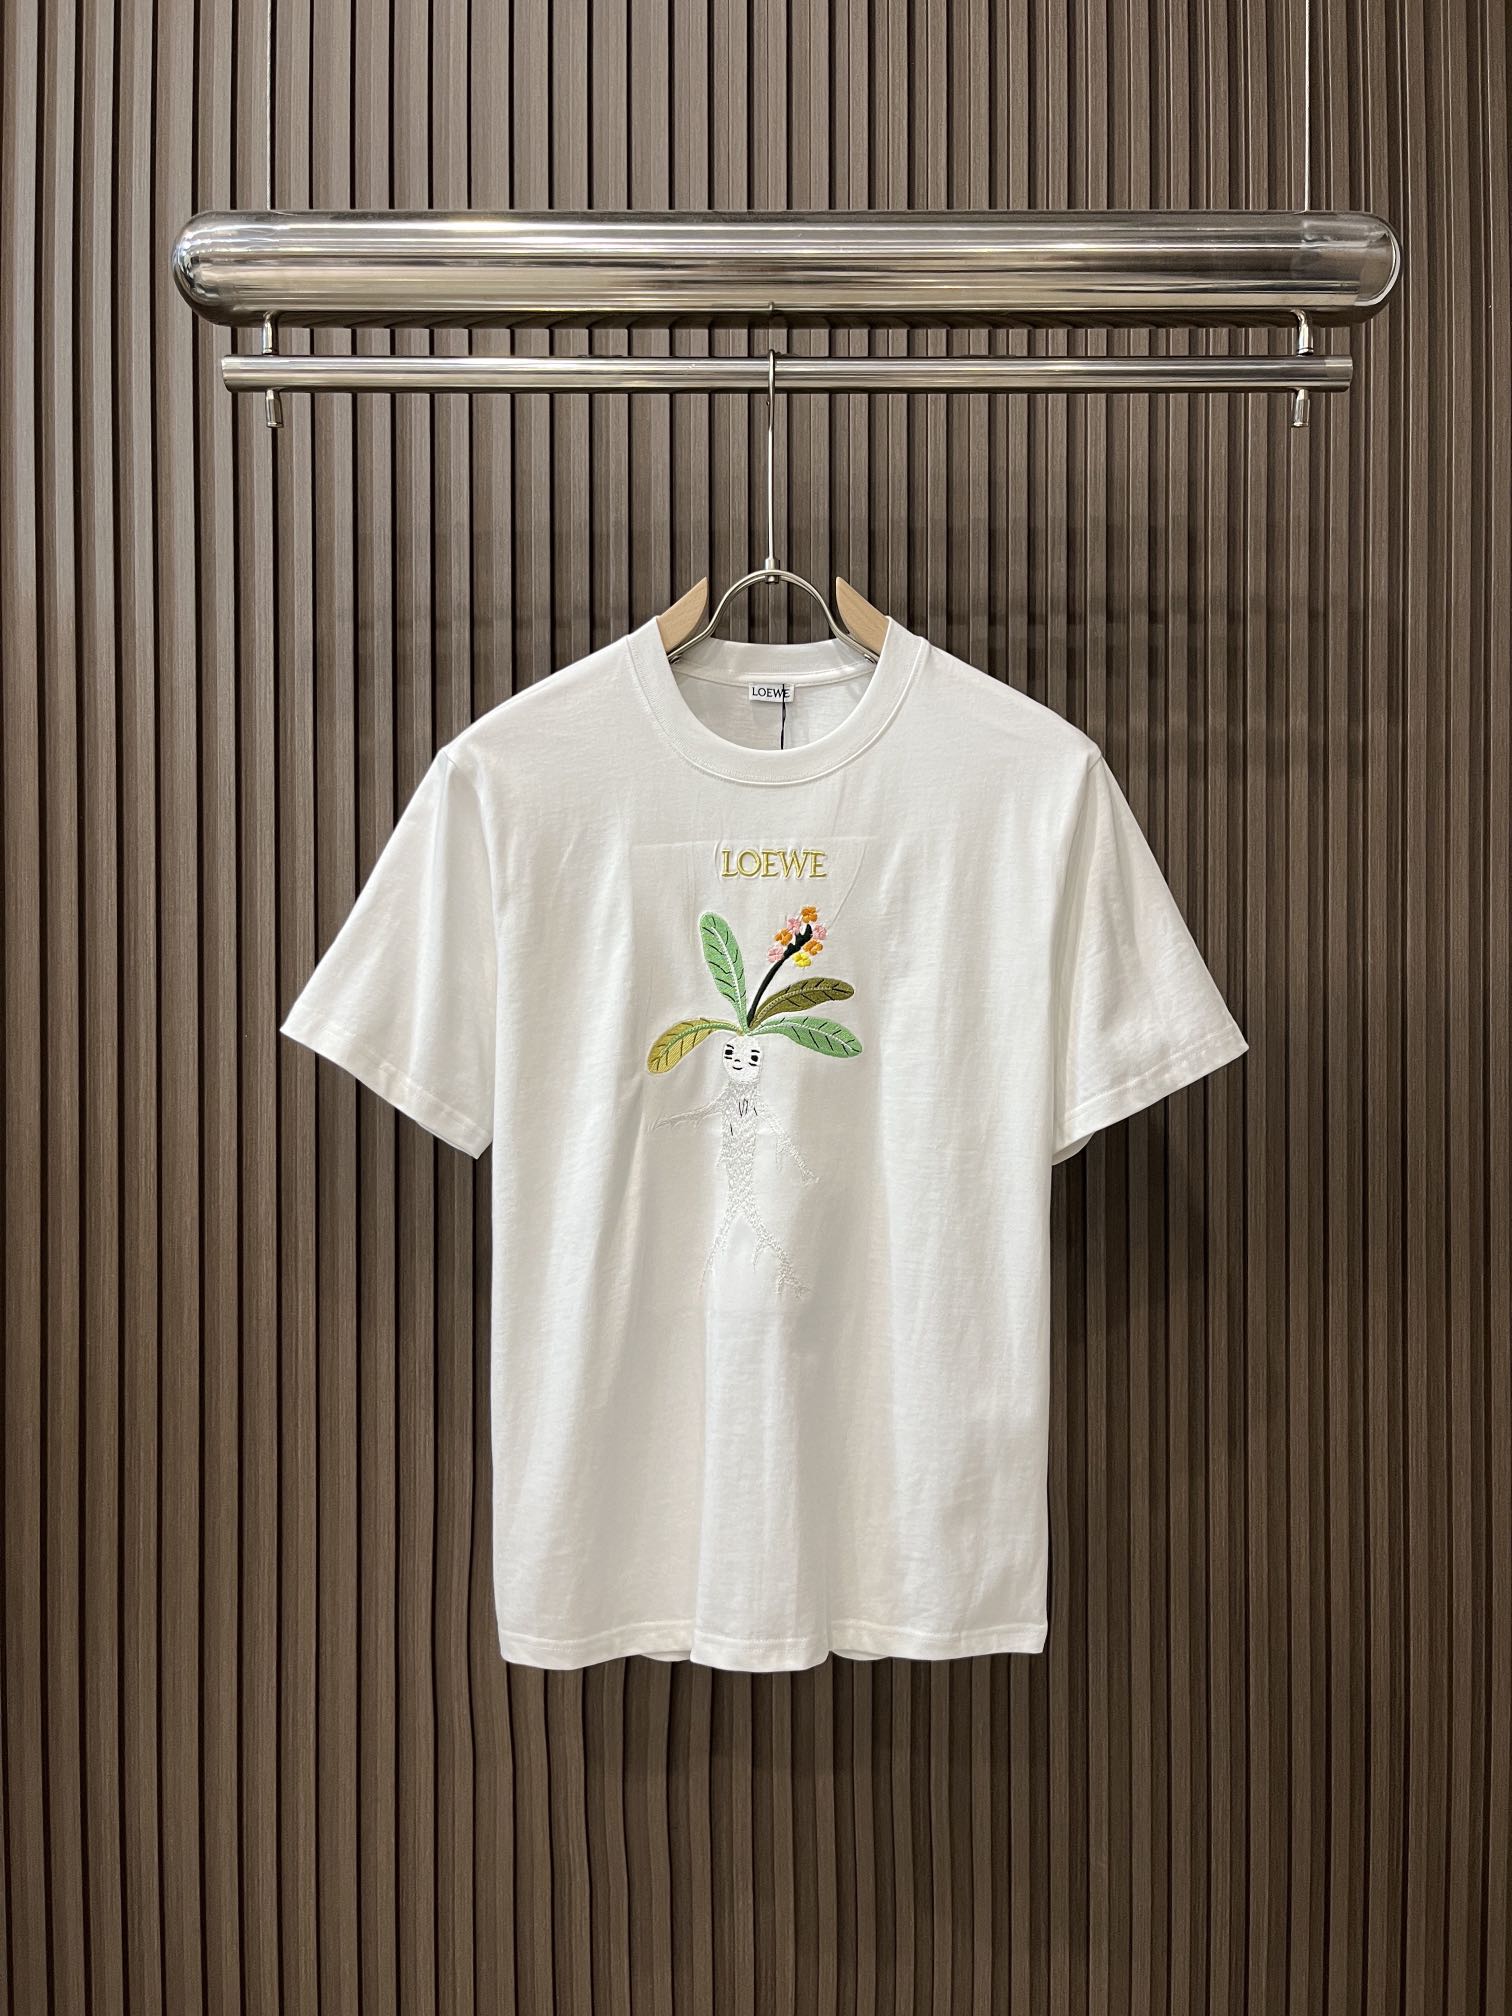 How can I find replica
 Loewe Clothing T-Shirt Black White Embroidery Cotton Fashion Short Sleeve